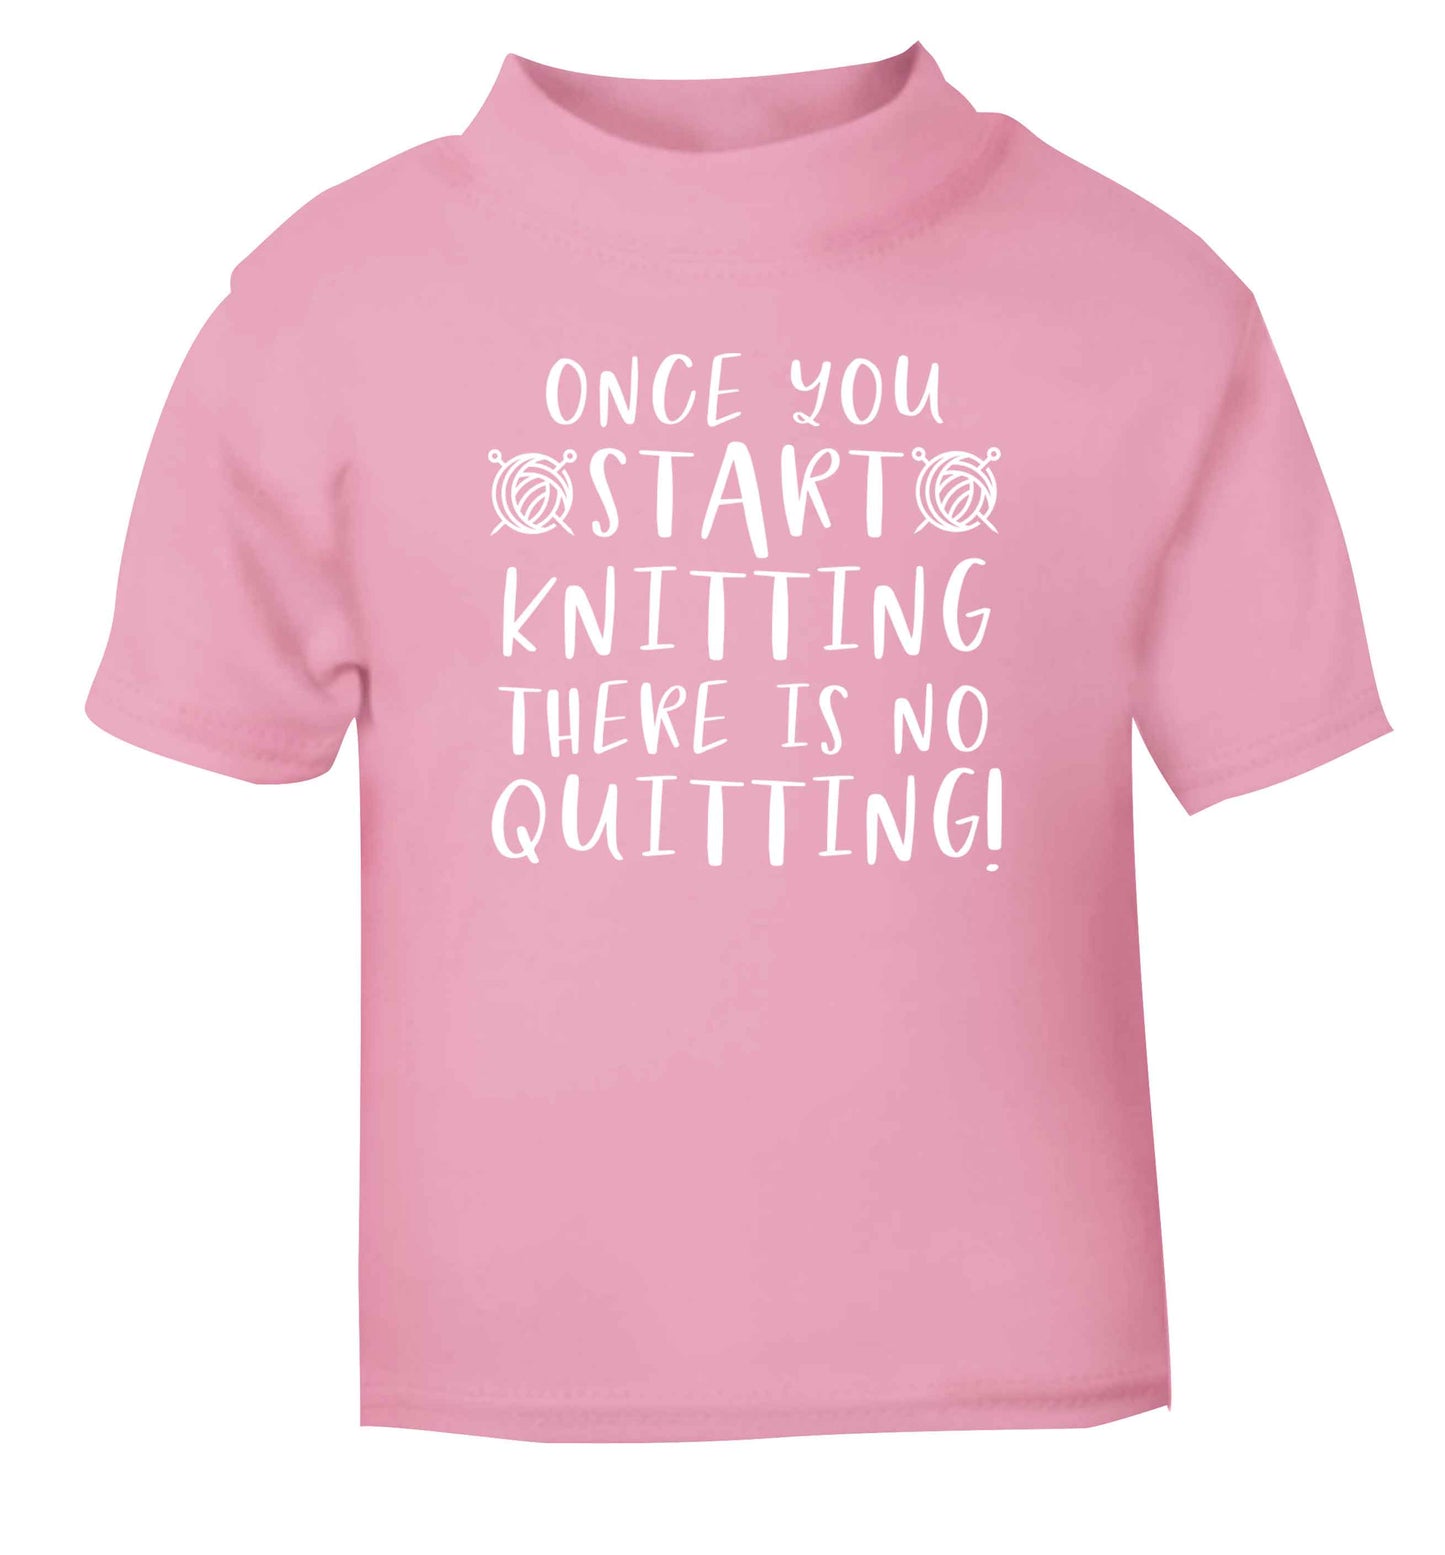 Once you start knitting there is no quitting! light pink Baby Toddler Tshirt 2 Years